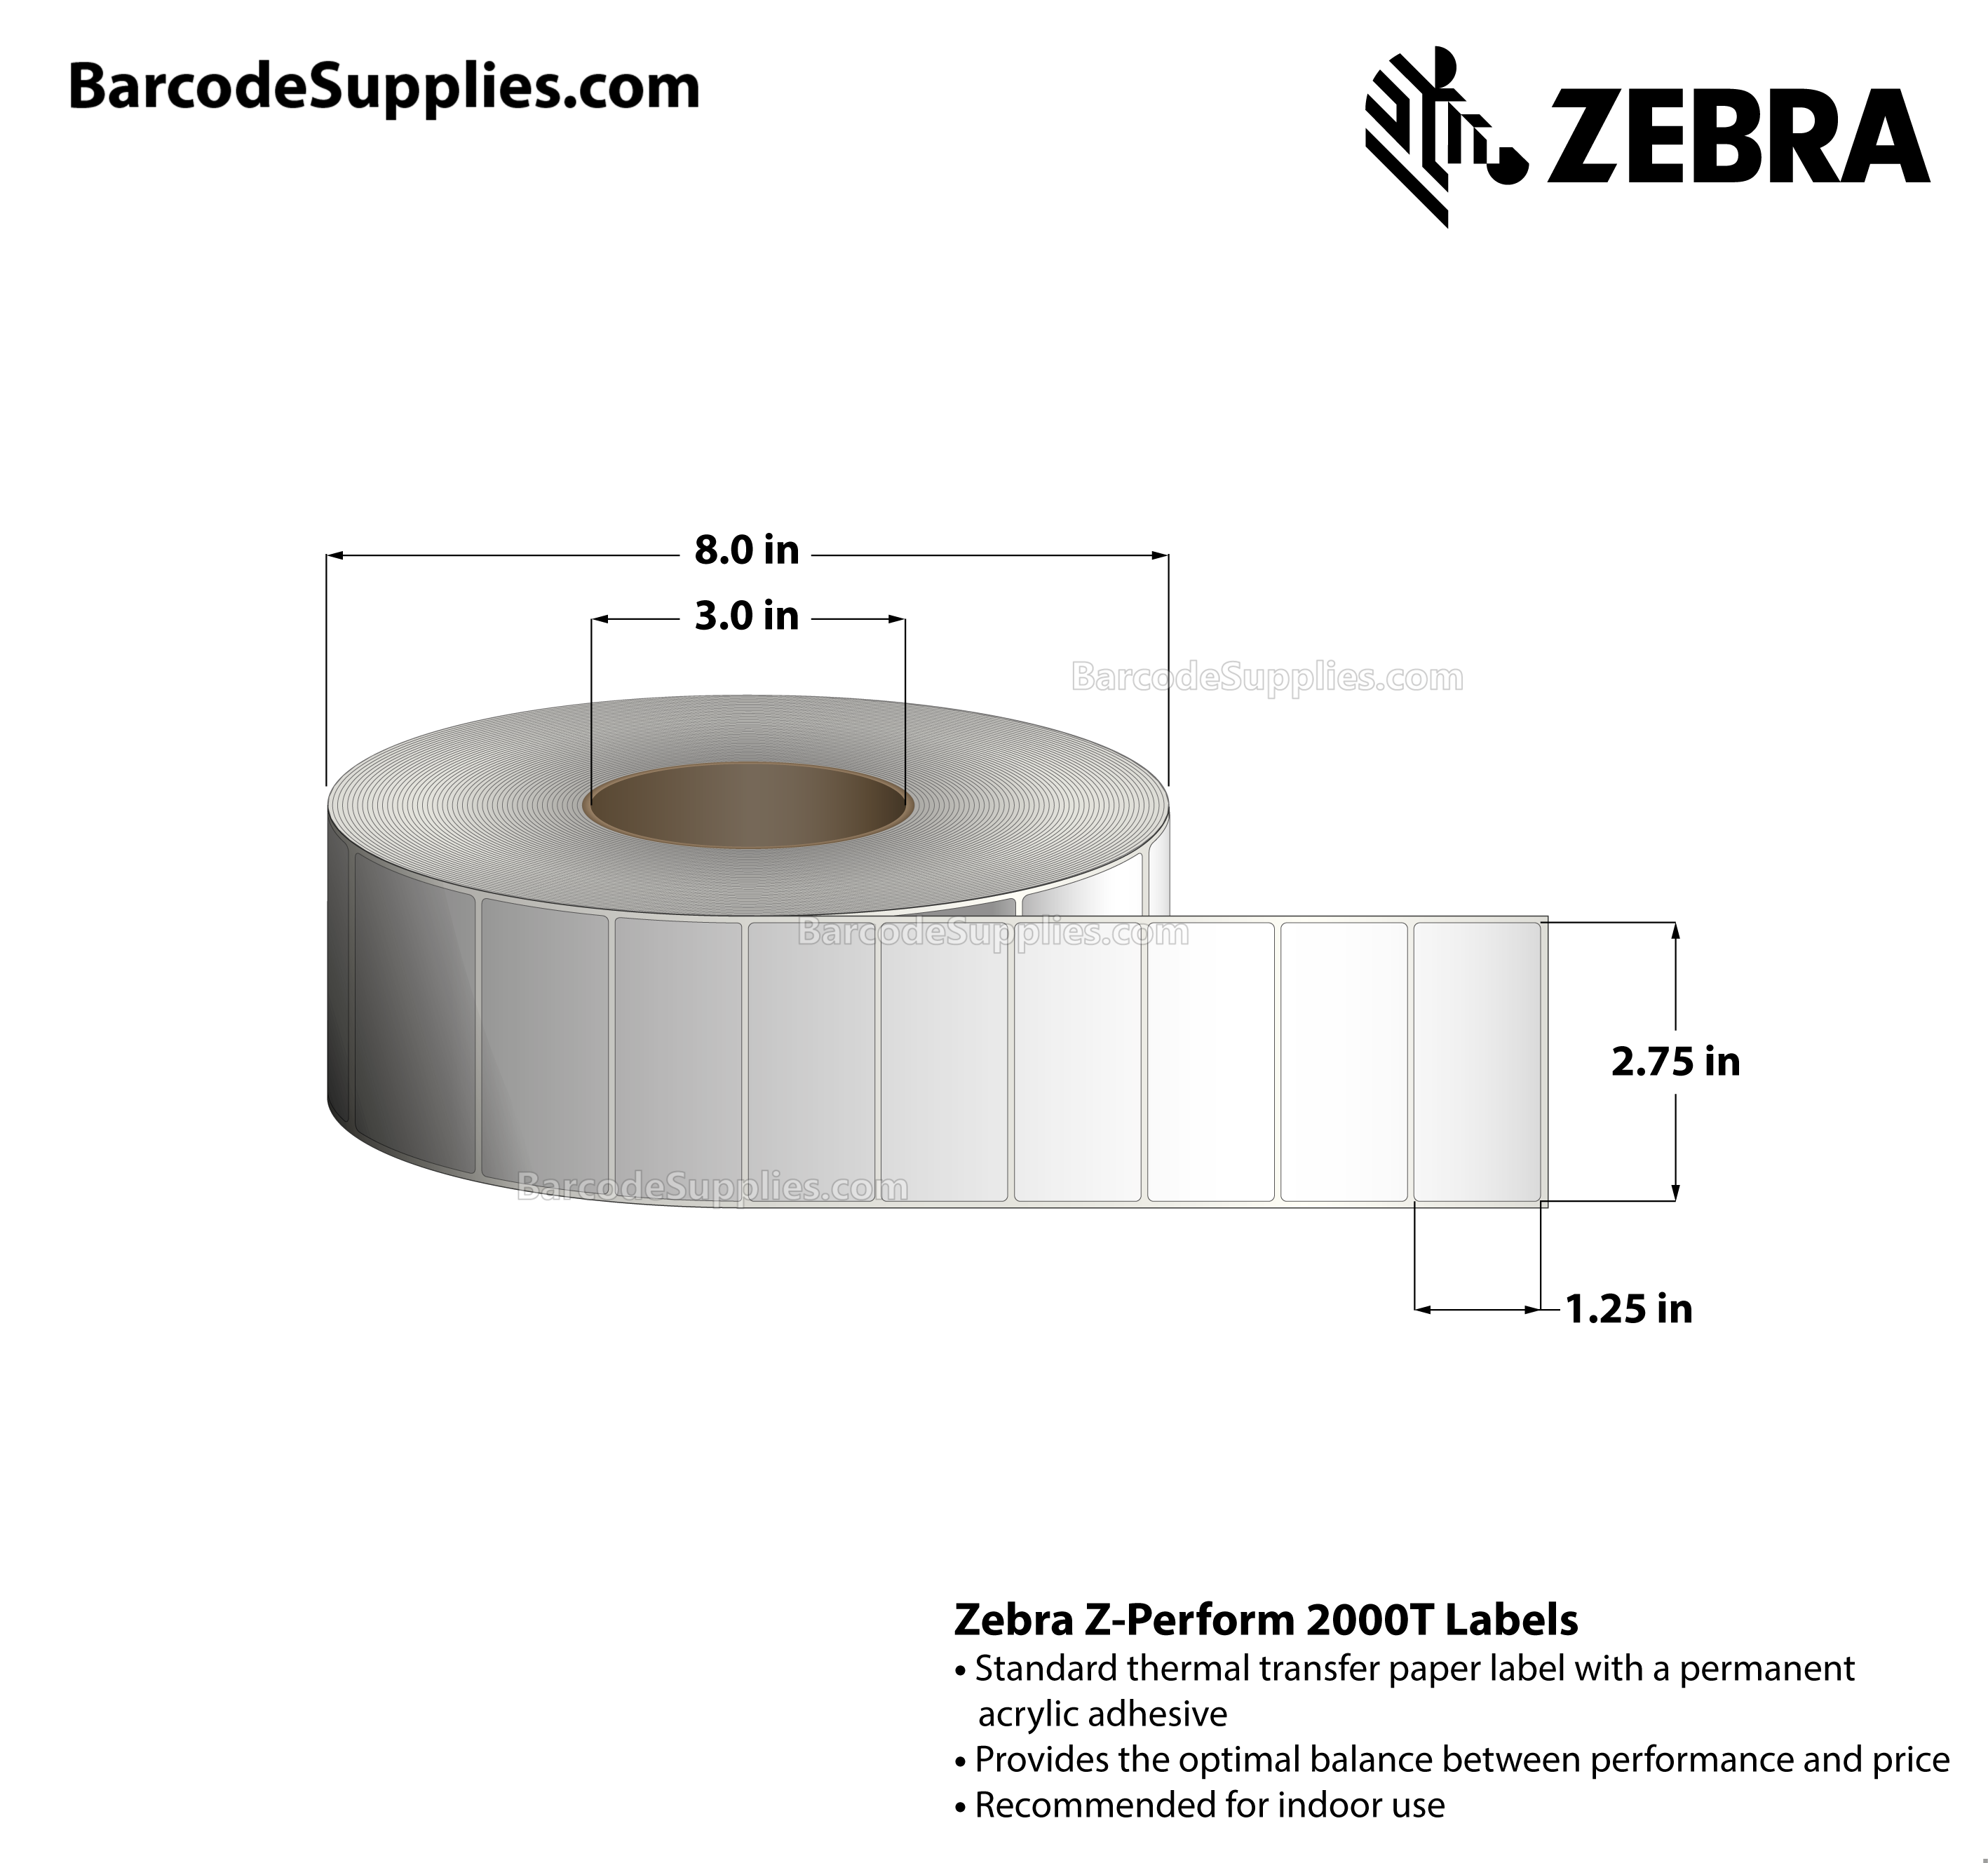 2.75 x 1.25 Thermal Transfer White Z-Perform 2000T All-Temp Labels With All-Temp Adhesive - Not Perforated - 4240 Labels Per Roll - Carton Of 8 Rolls - 33920 Labels Total - MPN: 72369